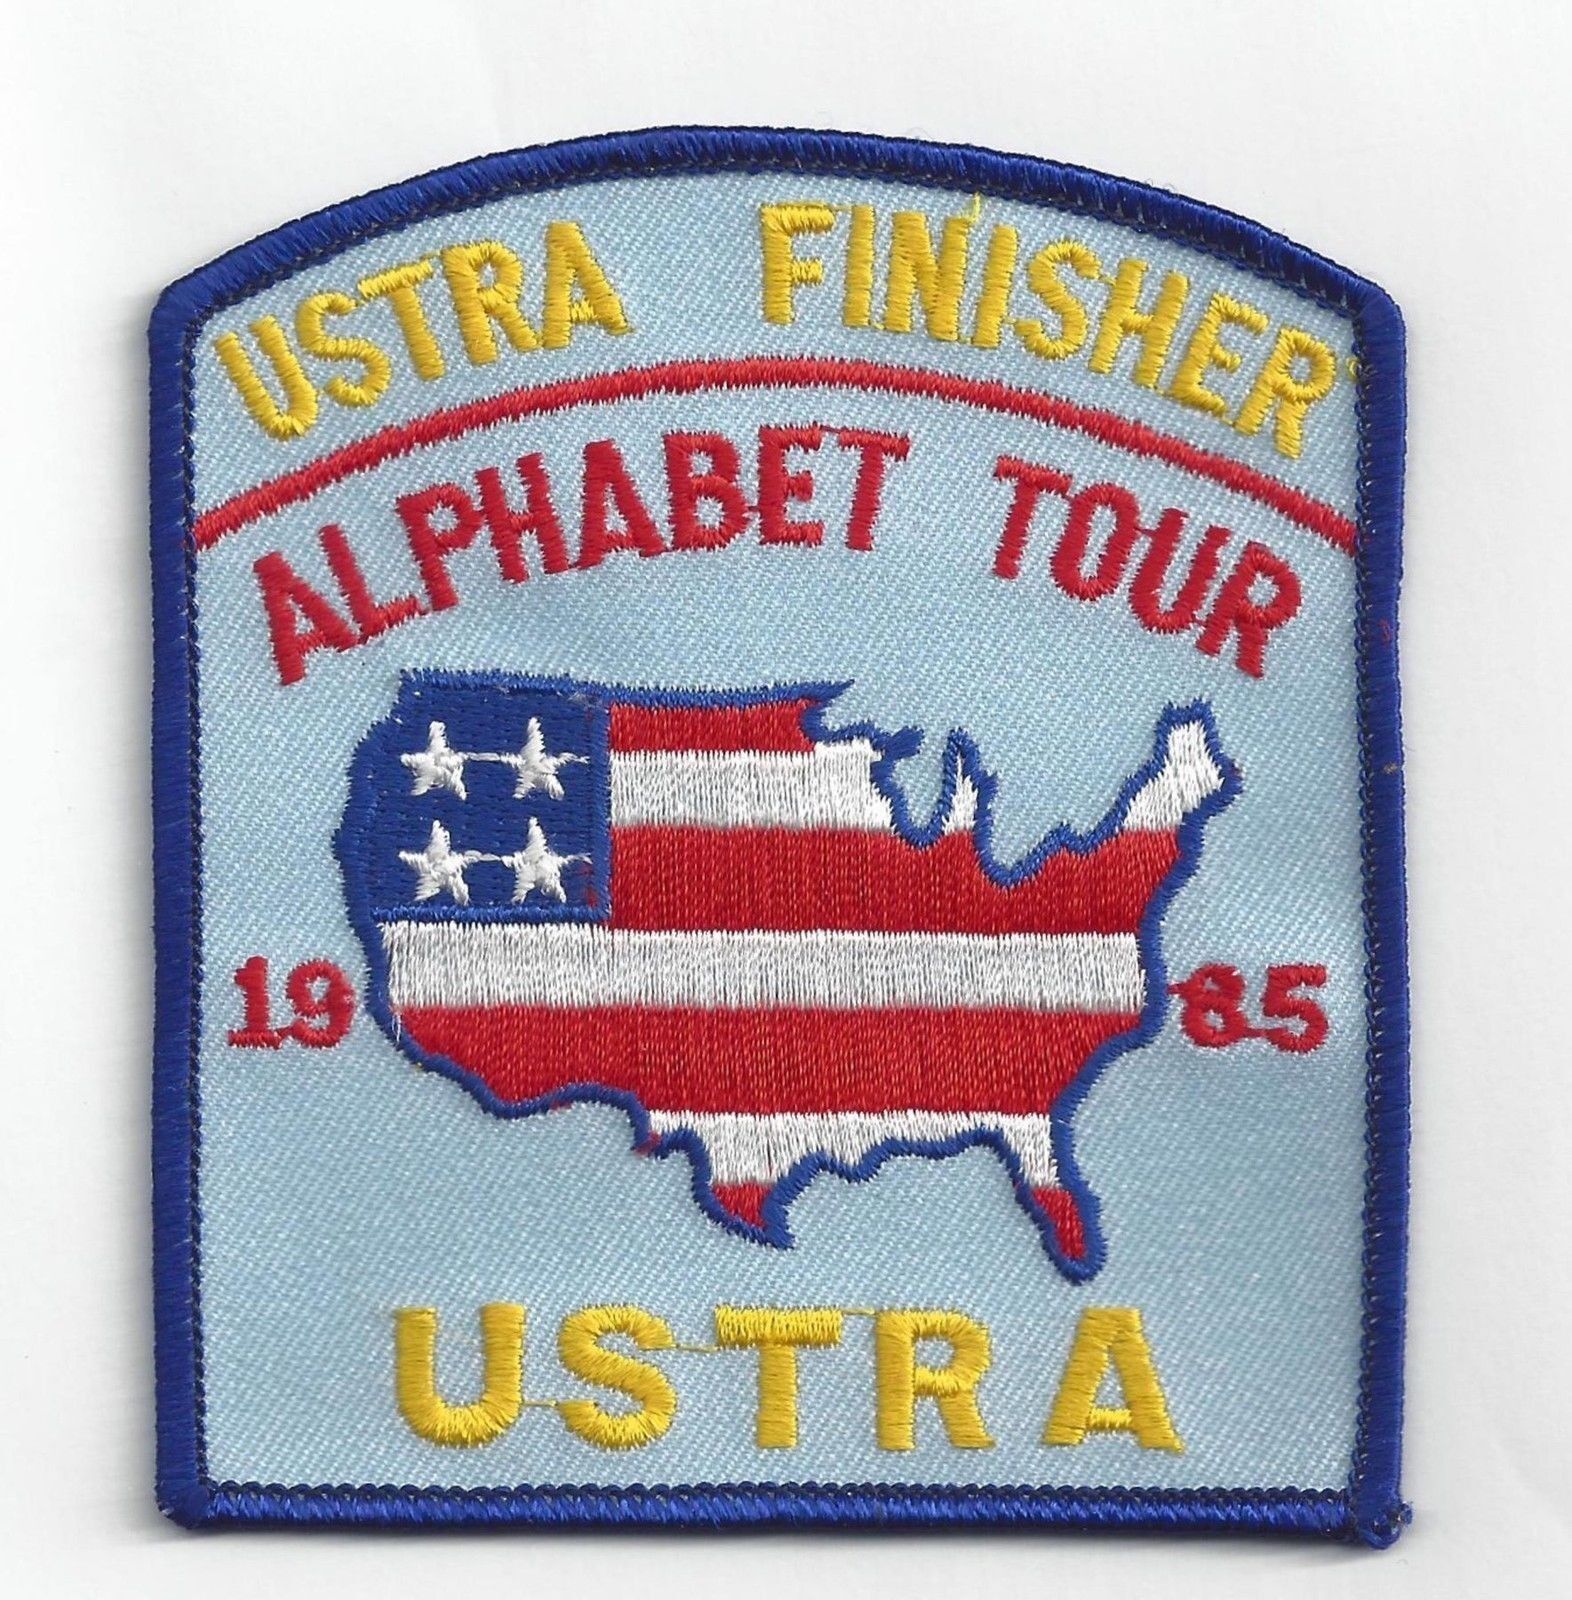 US Touring Riders Association Patch ALPHABET TOUR PATCH USTRA FINISHER 1985